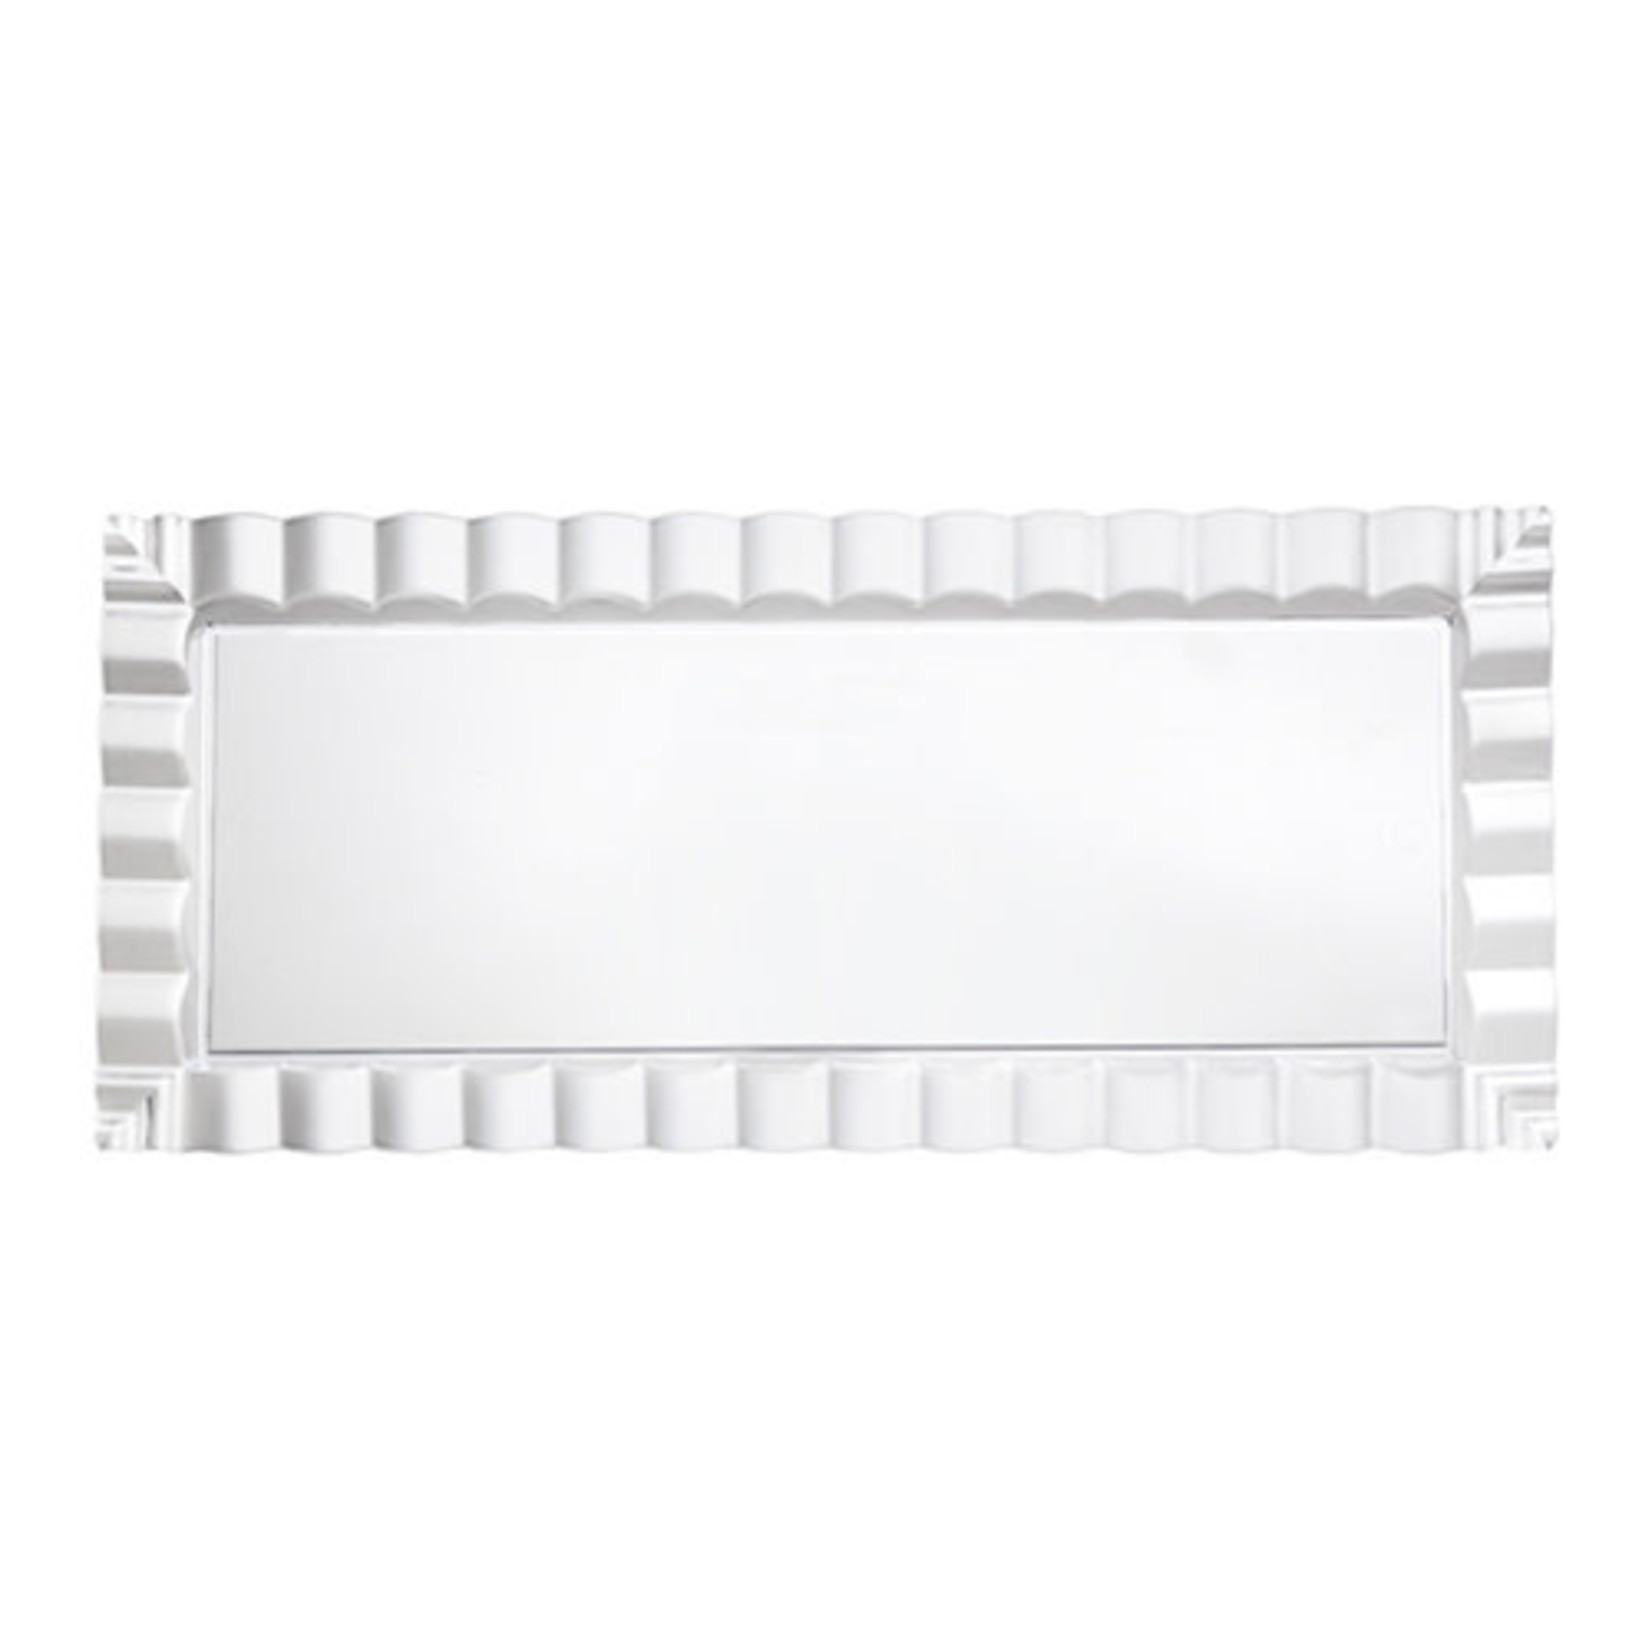 northwest Clear Rectangle Wavy Edged Tray - 1ct. (17" x 9")